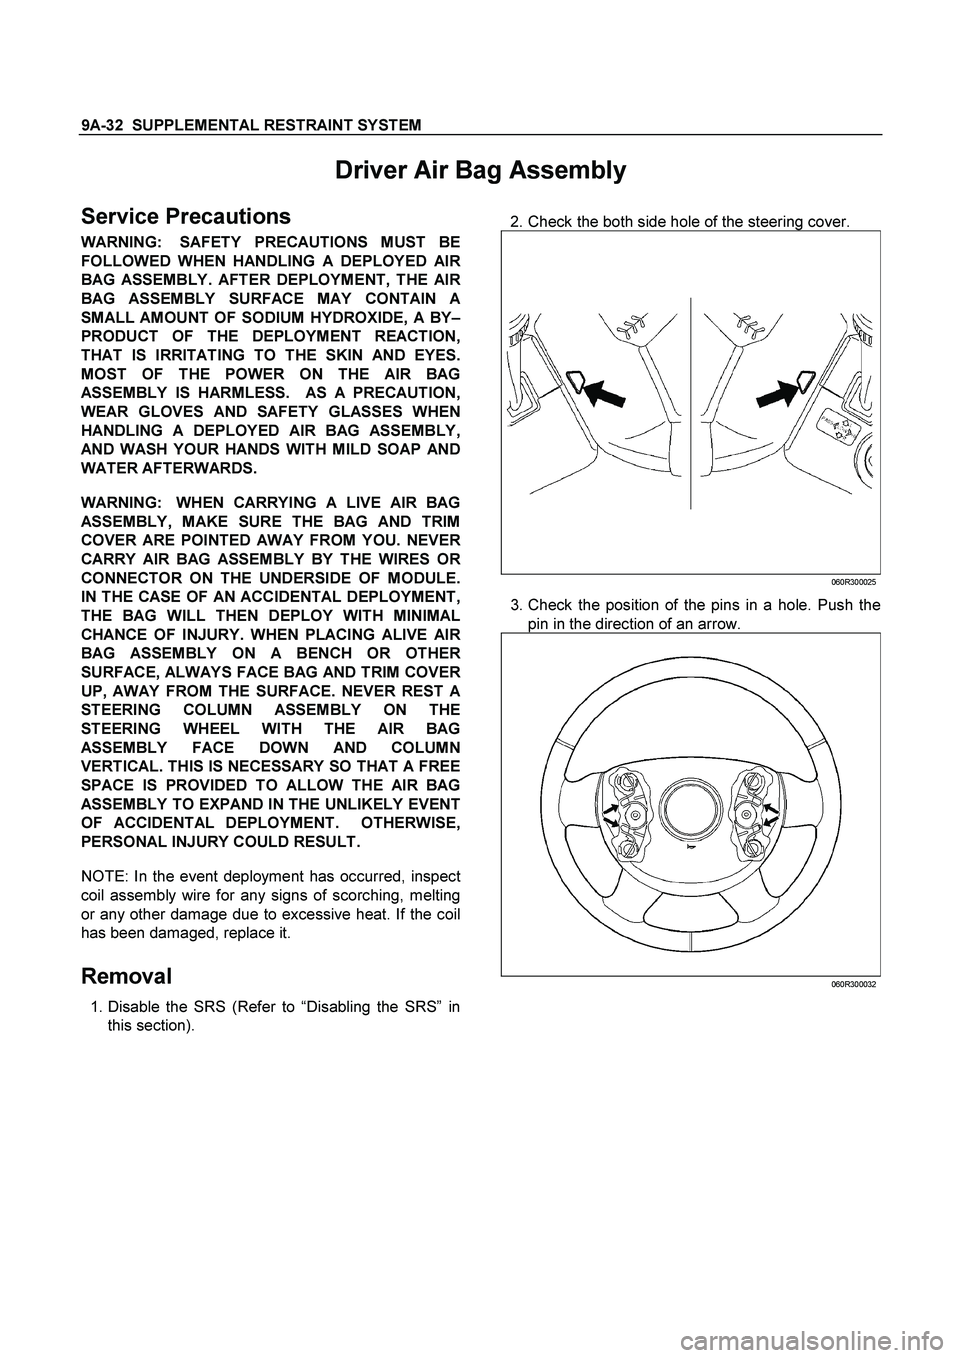 ISUZU TF SERIES 2004  Workshop Manual 9A-32  SUPPLEMENTAL RESTRAINT SYSTEM
 
Driver Air Bag Assembly 
Service Precautions 
WARNING:  SAFETY PRECAUTIONS MUST BE
FOLLOWED WHEN HANDLING A DEPLOYED AI
R
BAG ASSEMBLY. AFTER DEPLOYMENT, THE AIR